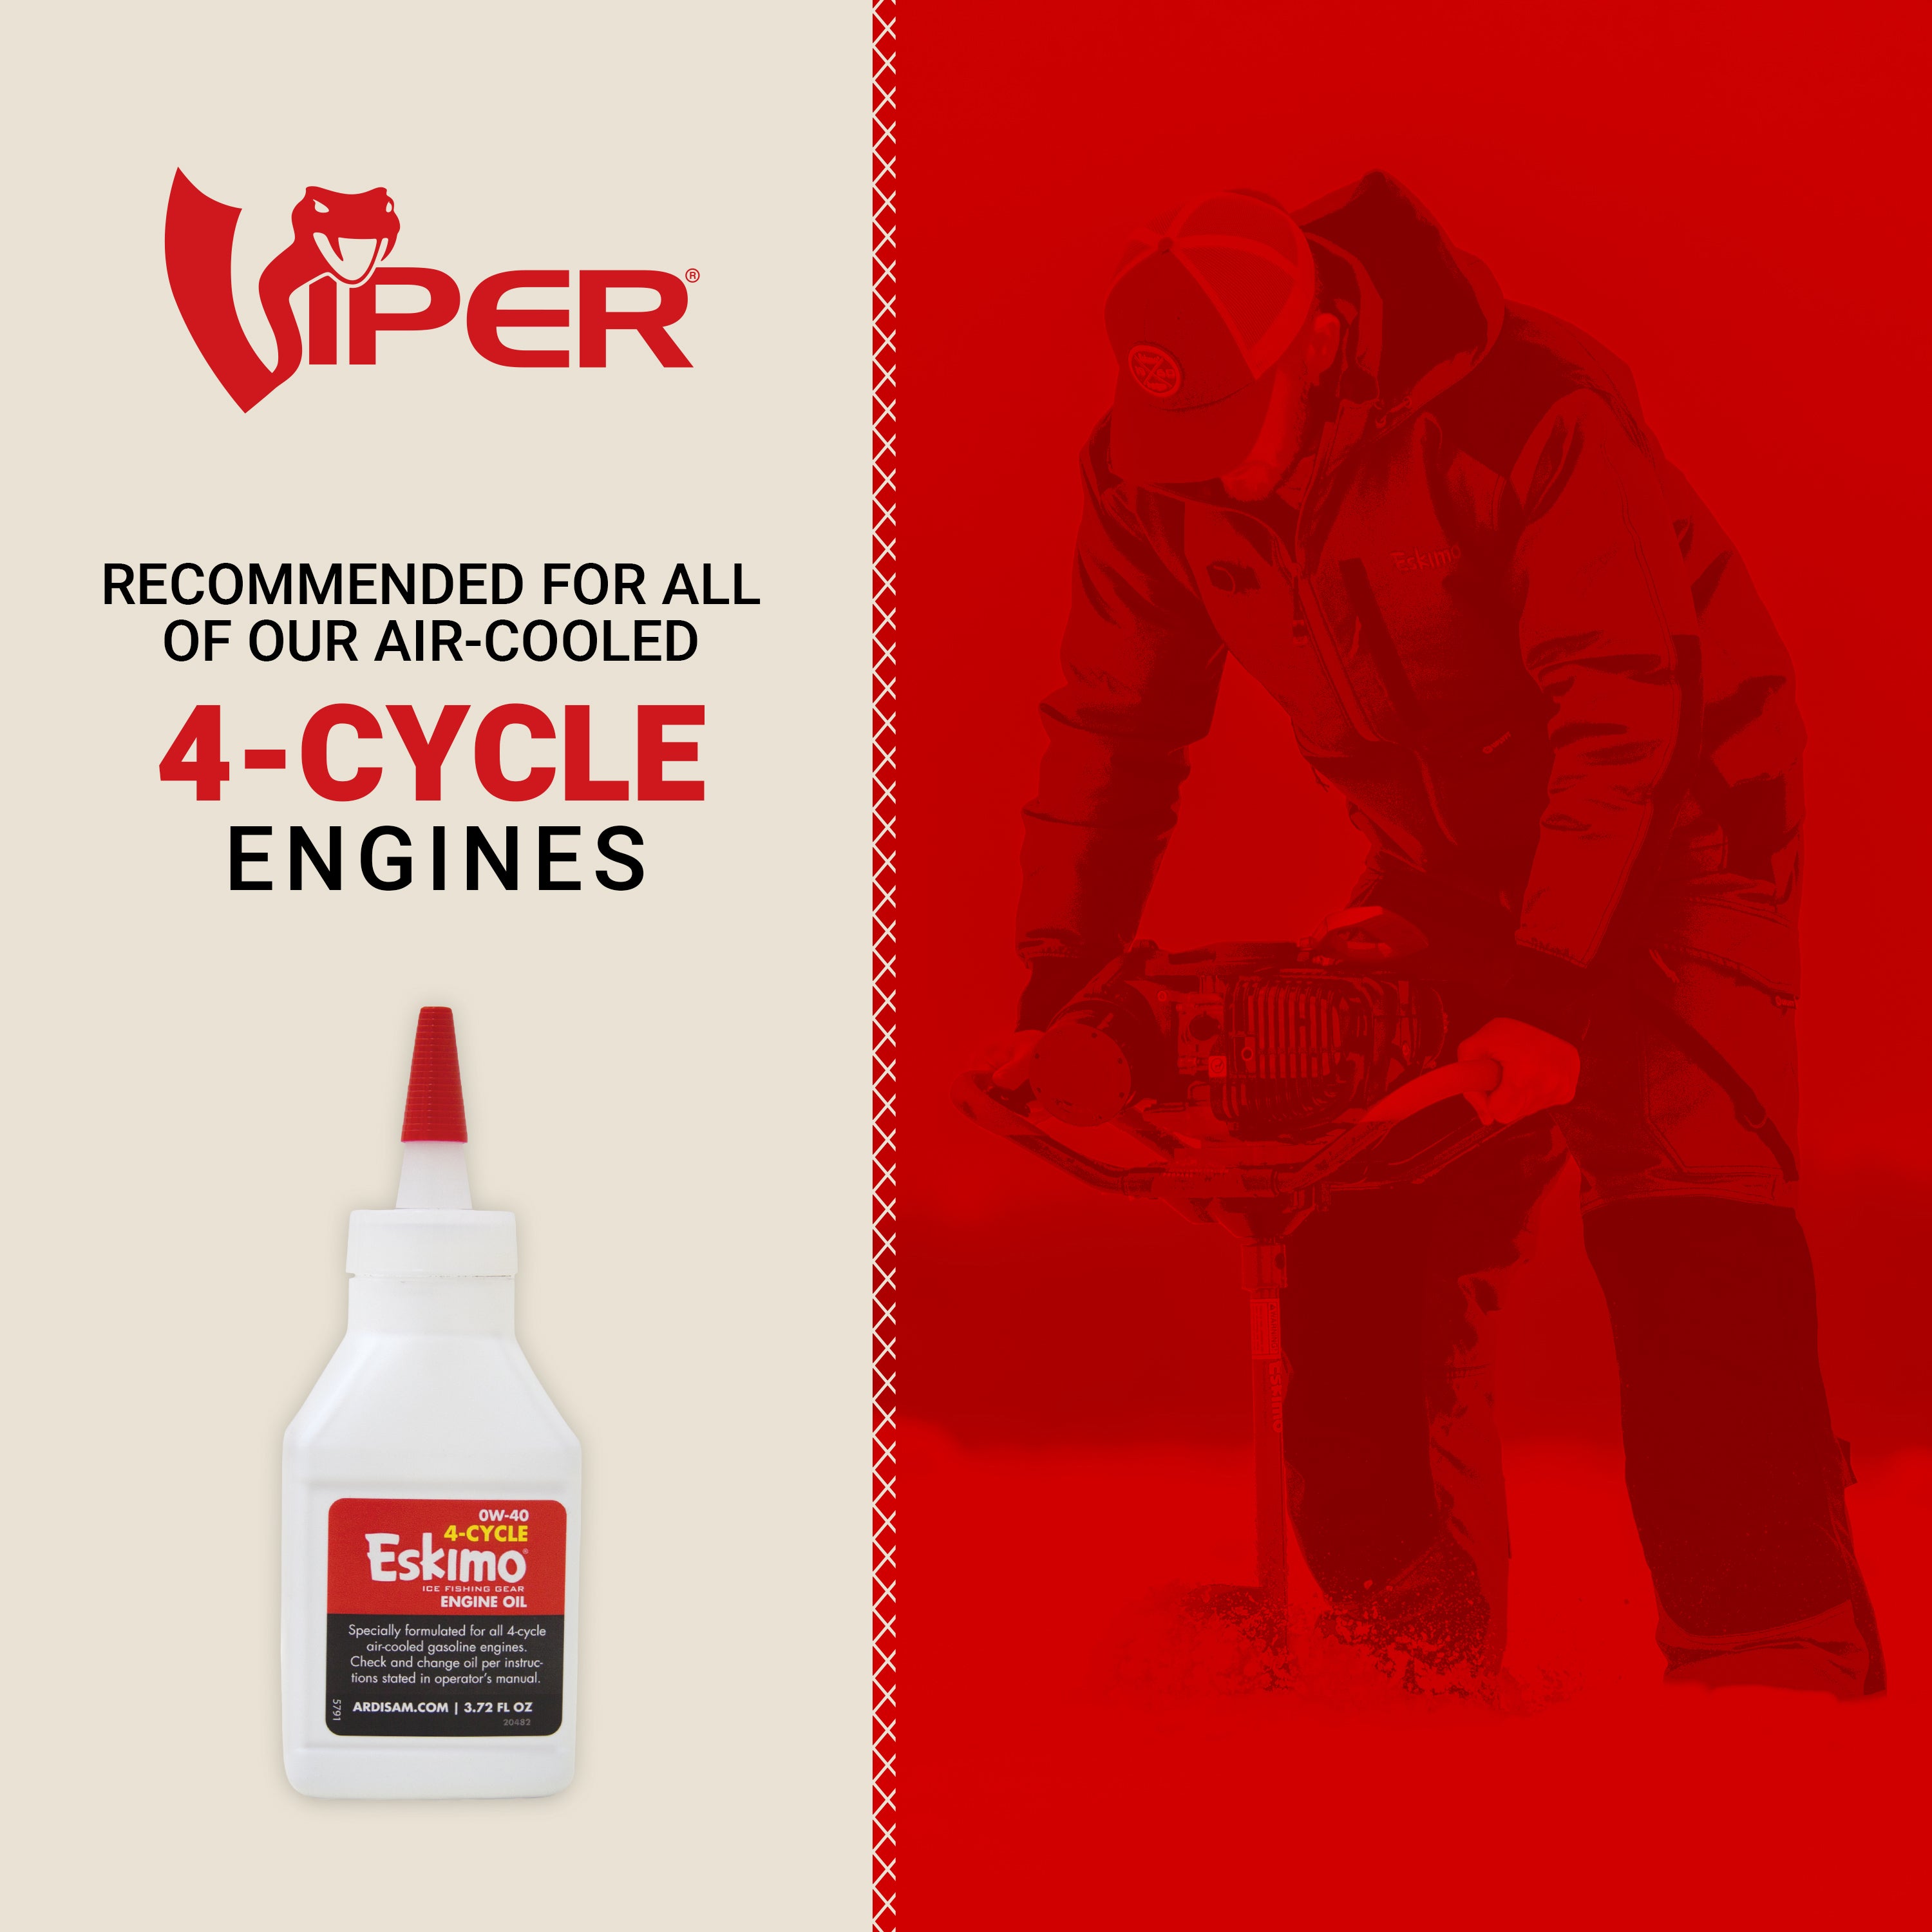 Viper® 4-Cycle Engine Oil